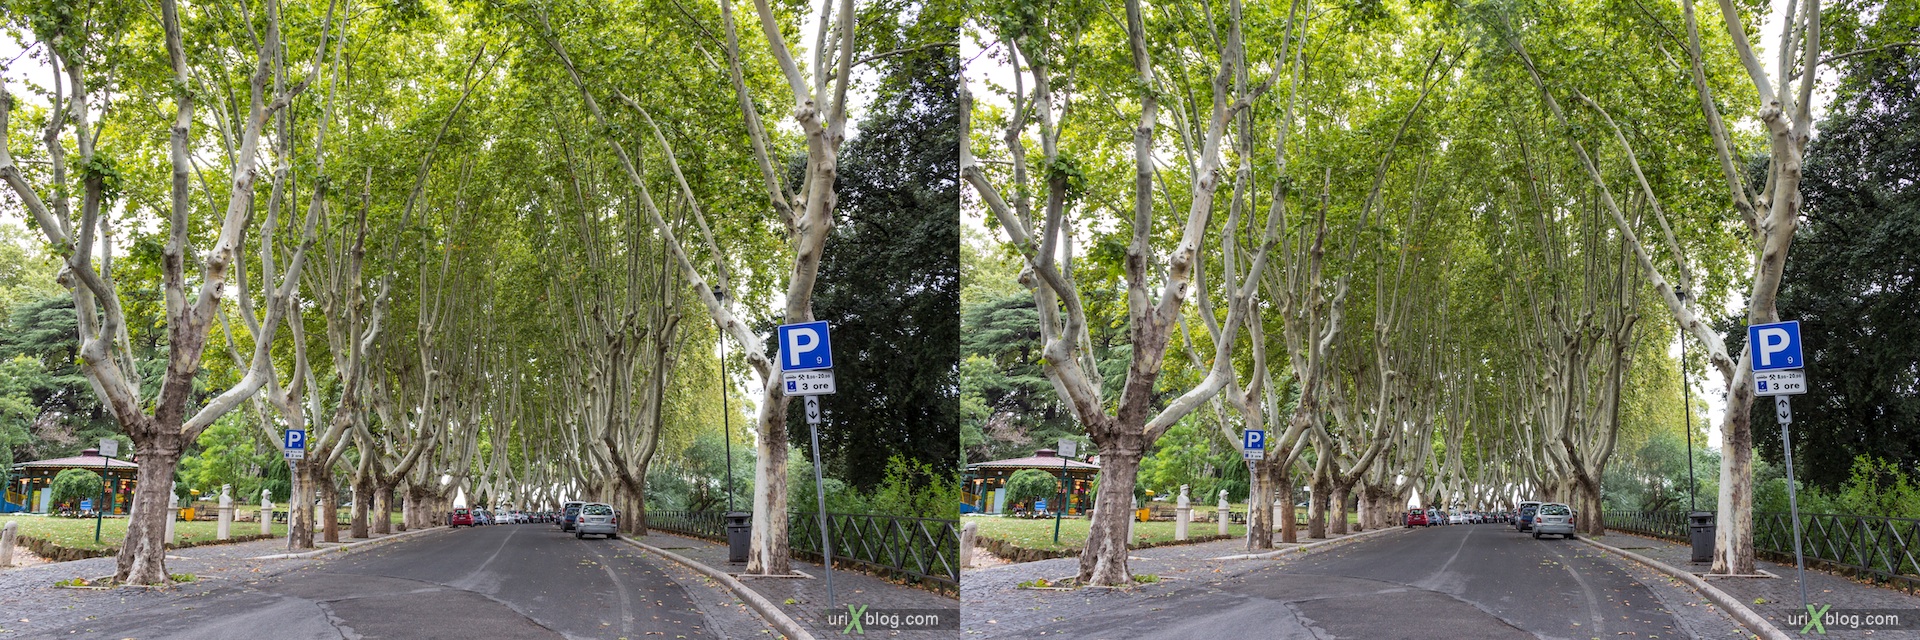 2012, Passeggiata del Gianicolo street, trees, Rome, Italy, Europe, 3D, stereo pair, cross-eyed, crossview, cross view stereo pair